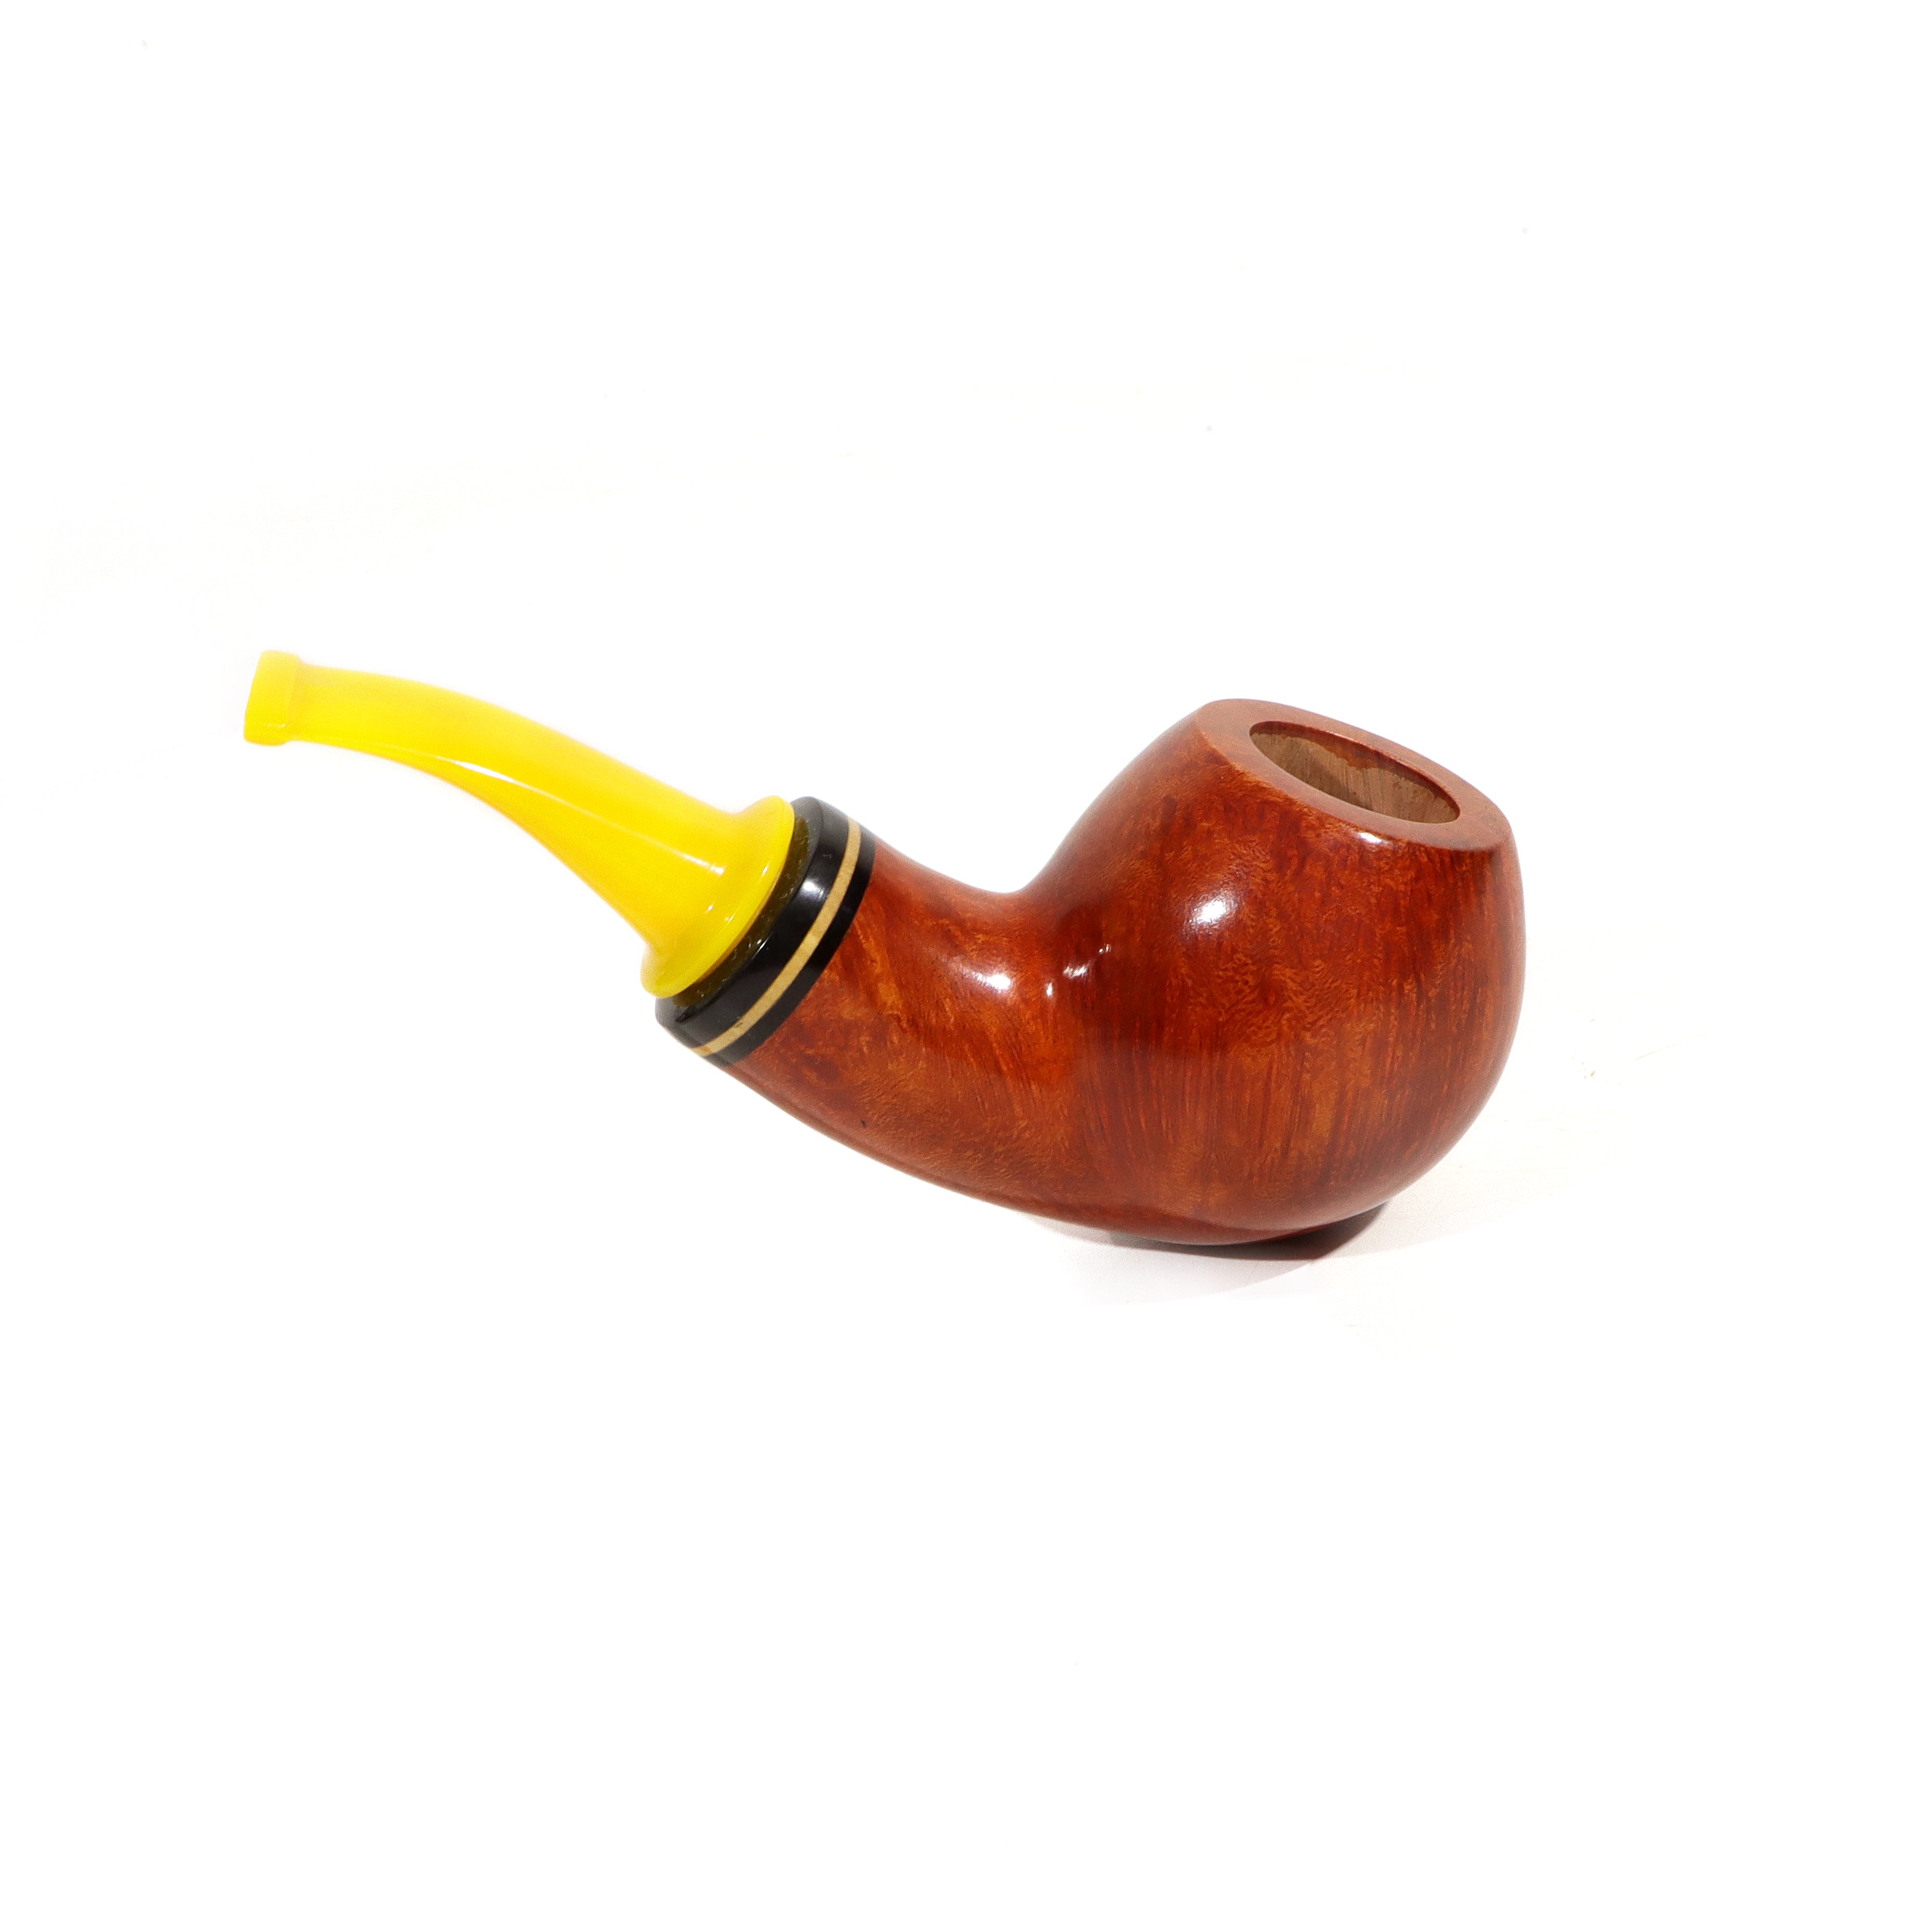 Handmade Briar Wood Tobacco Pipes Hollow Shank Apple Shape With Acrylic and Ebonite Stem